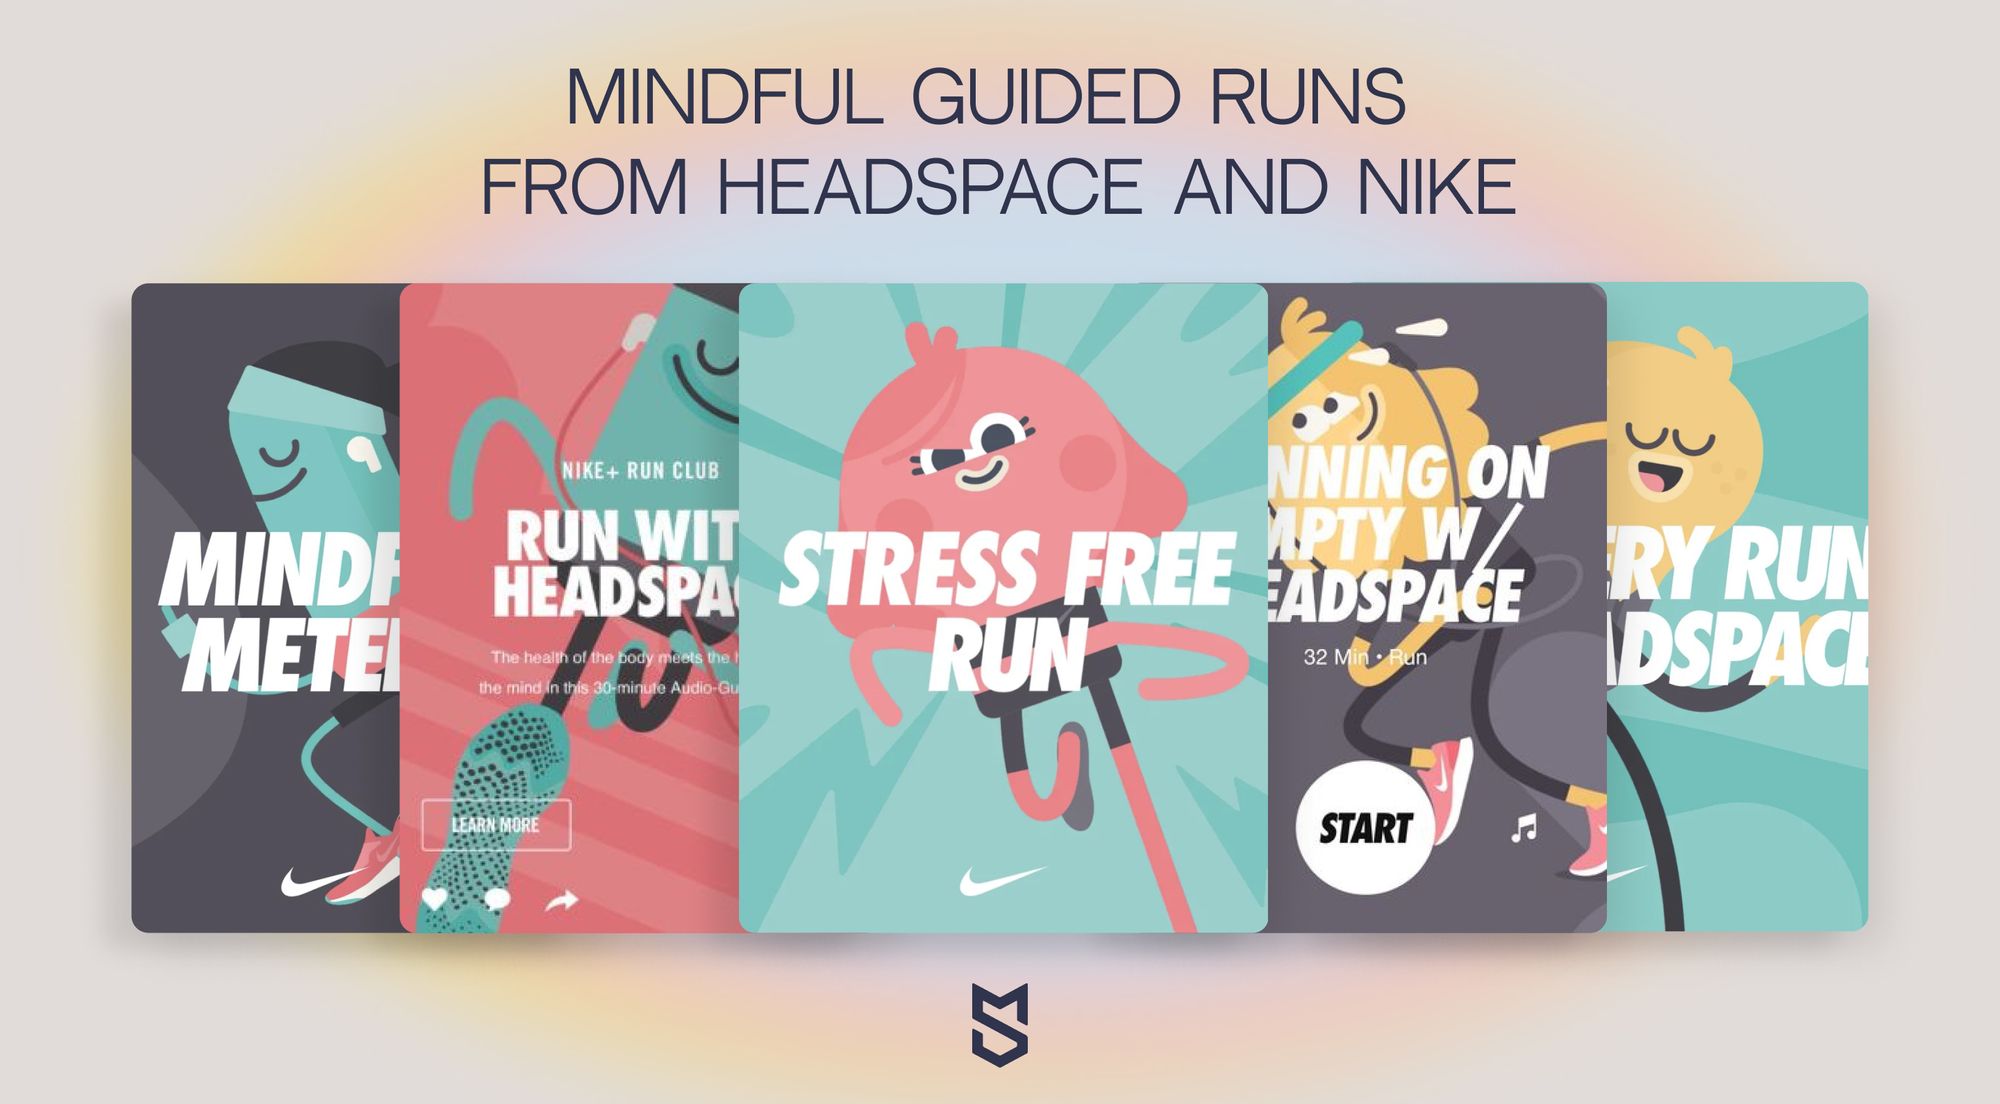 Mindful Guided Runs from Headspace and Nike